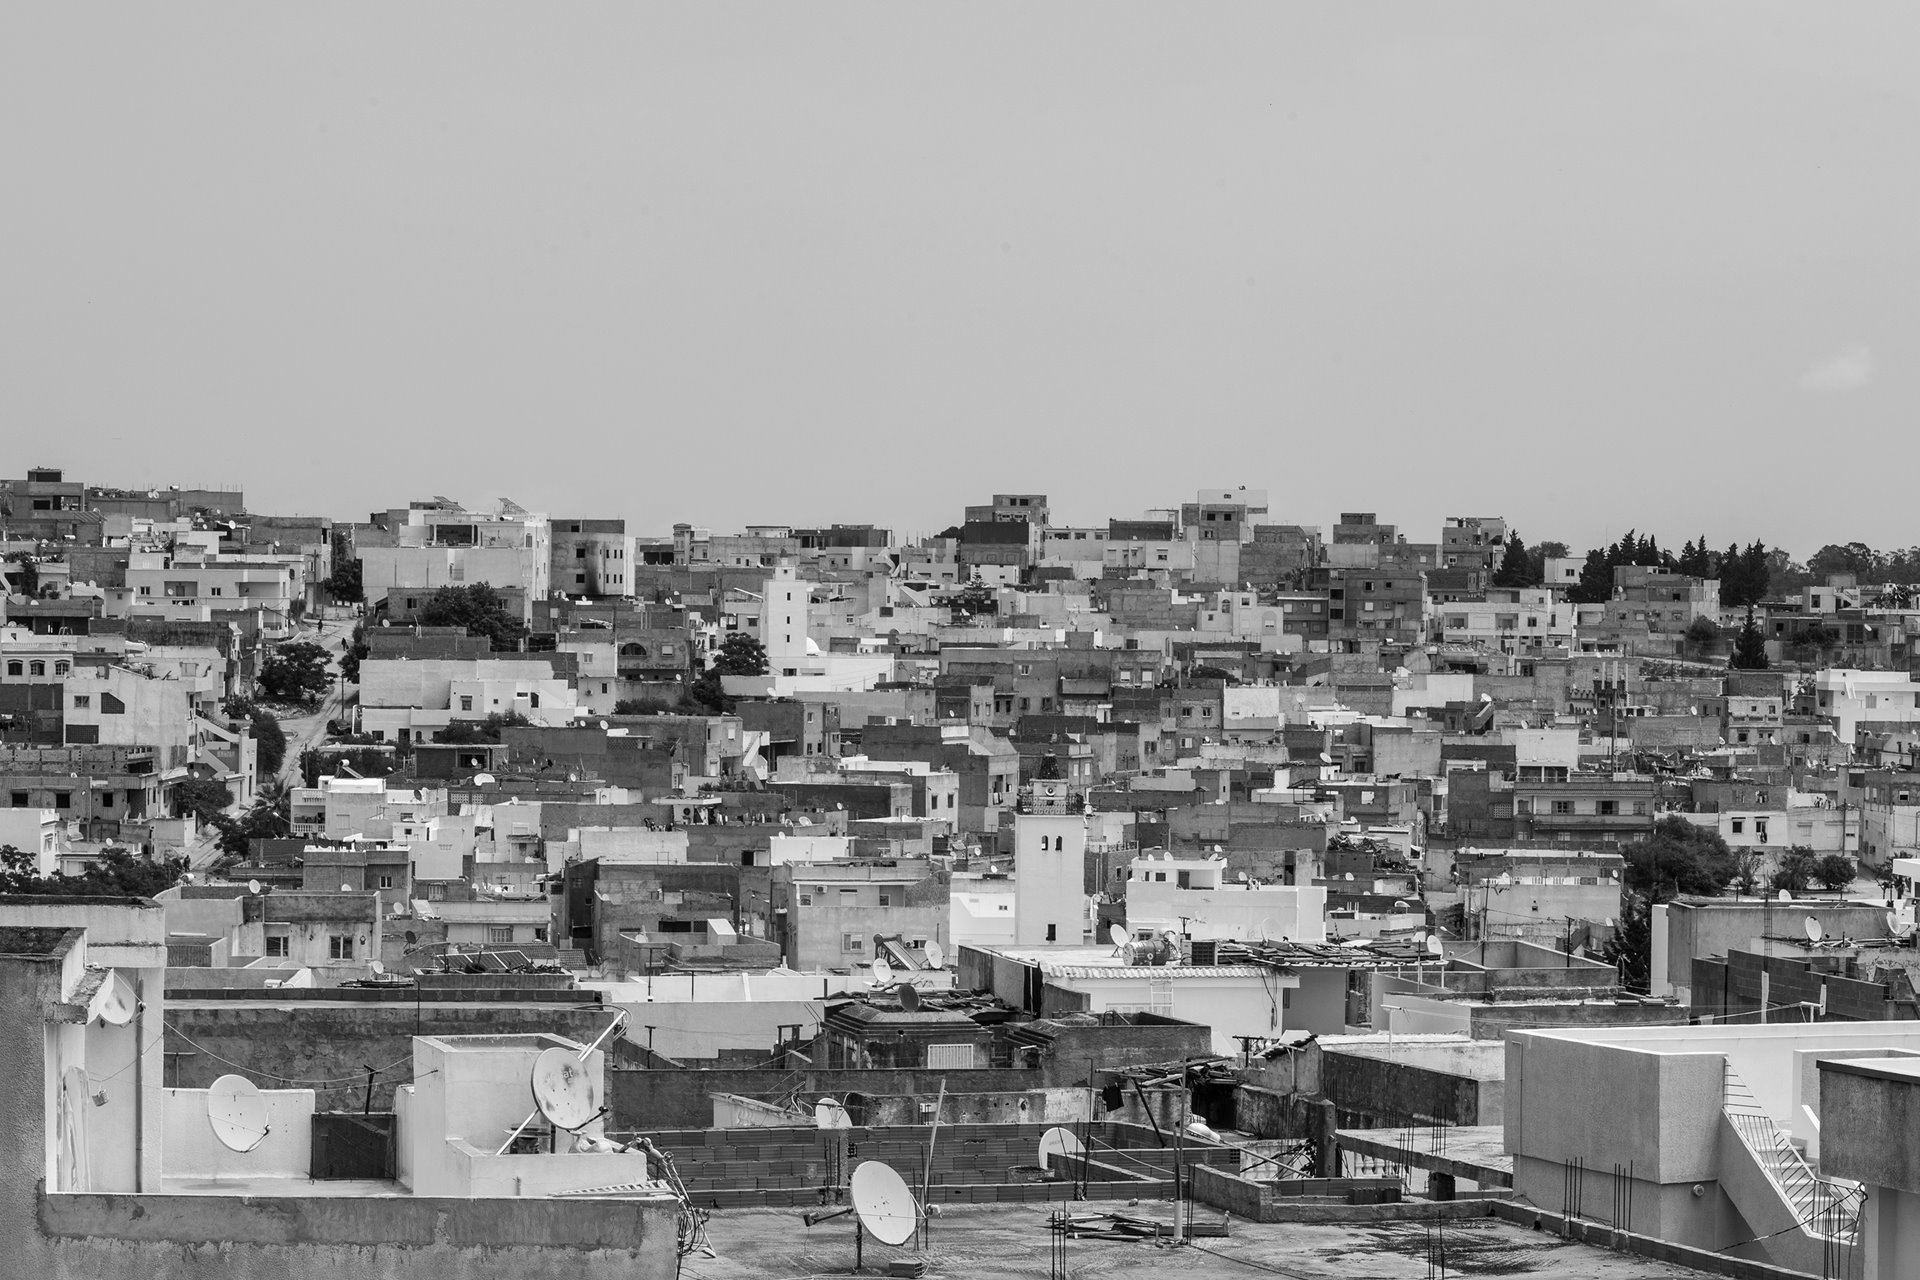 Jebel Lahmar, a neighborhood on the outskirts of Tunis, Tunisia, has grown haphazardly from a shantytown and is densely populated, with precarious housing and limited infrastructure.